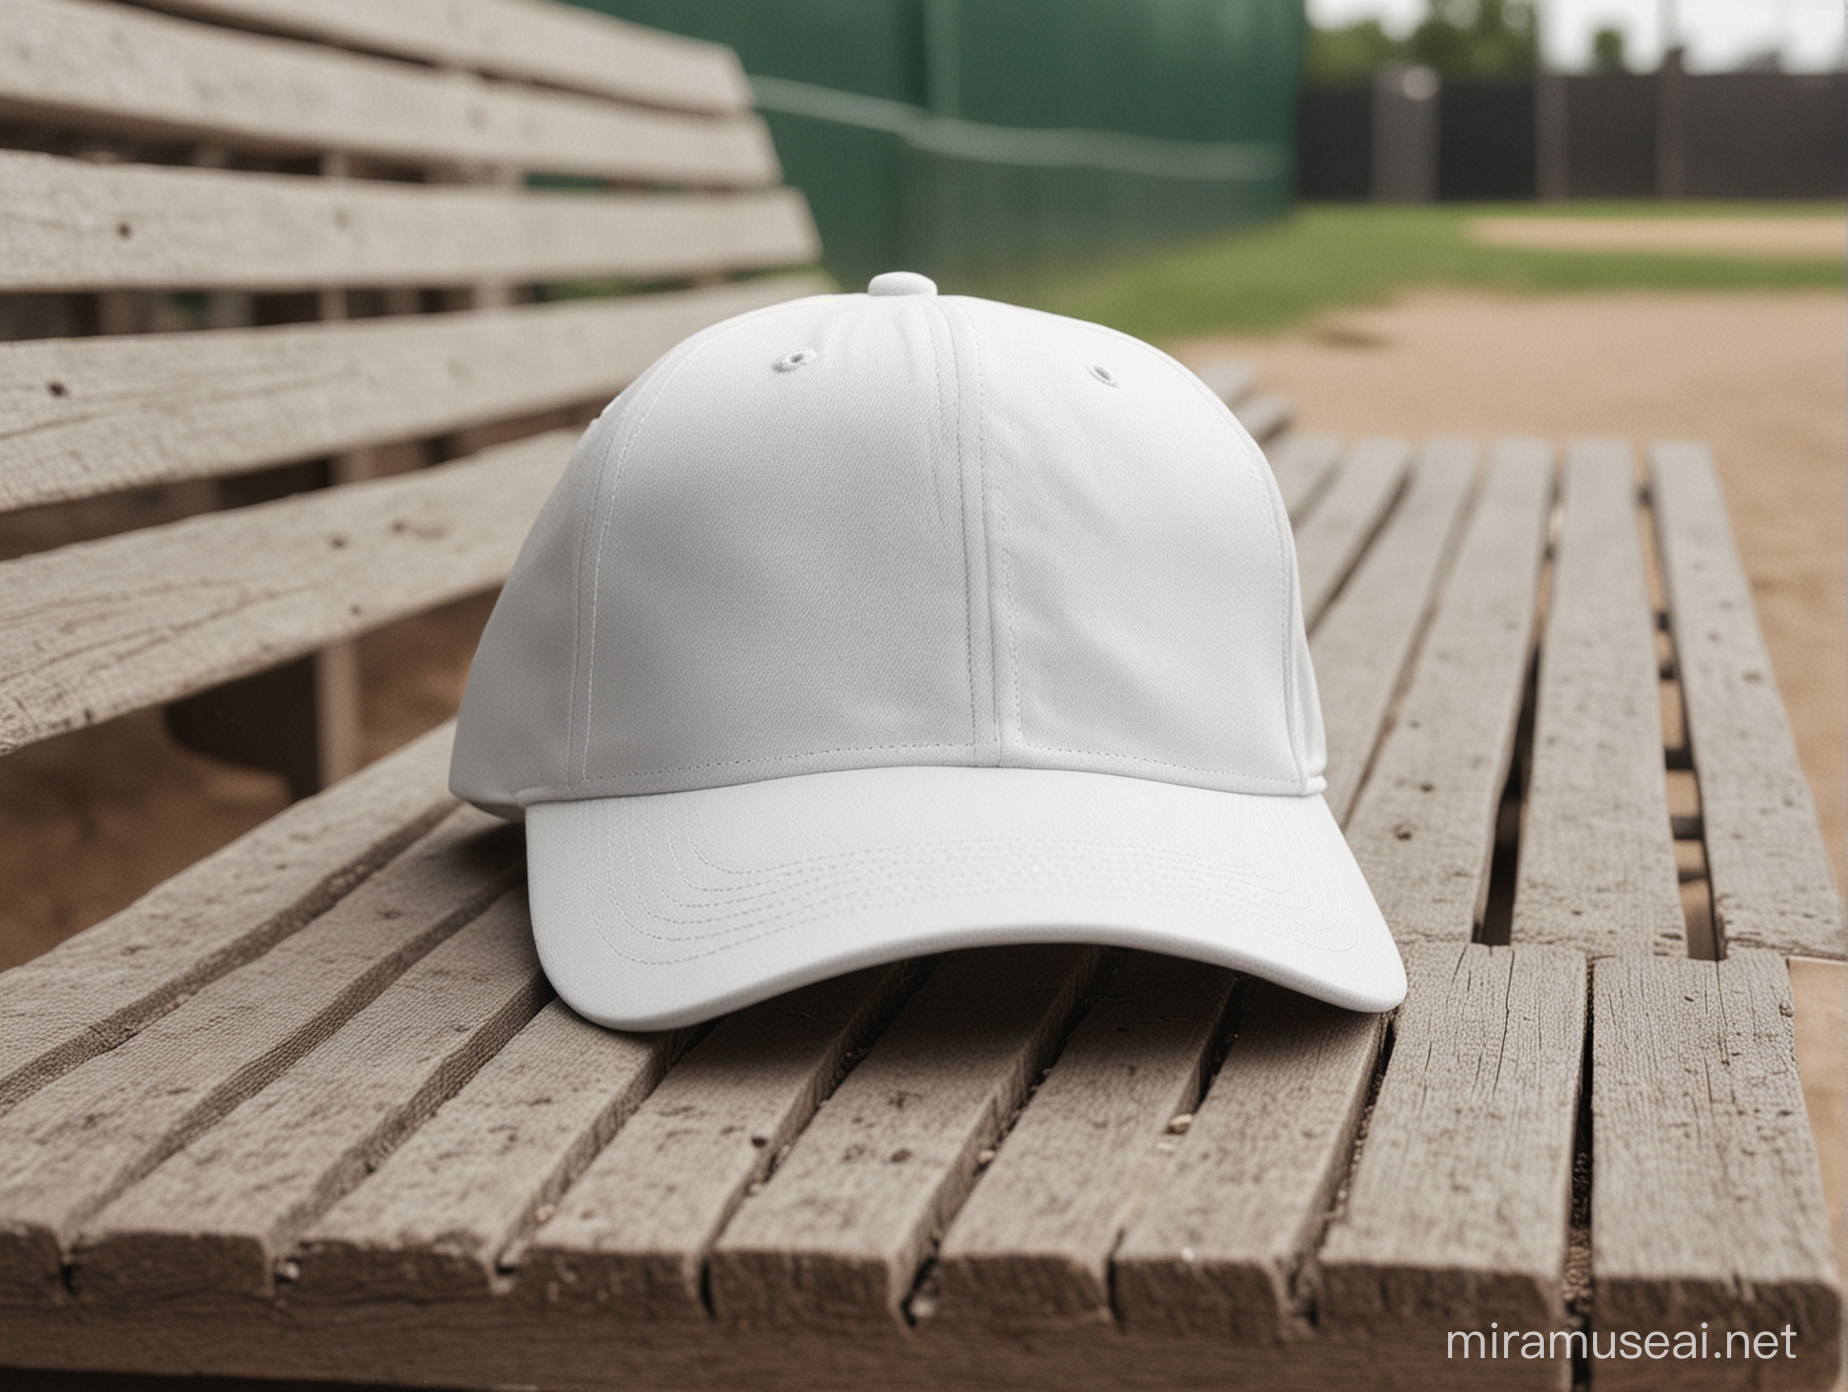 Create an image of a blank white baseball cap on a bench in a baseball dugout.